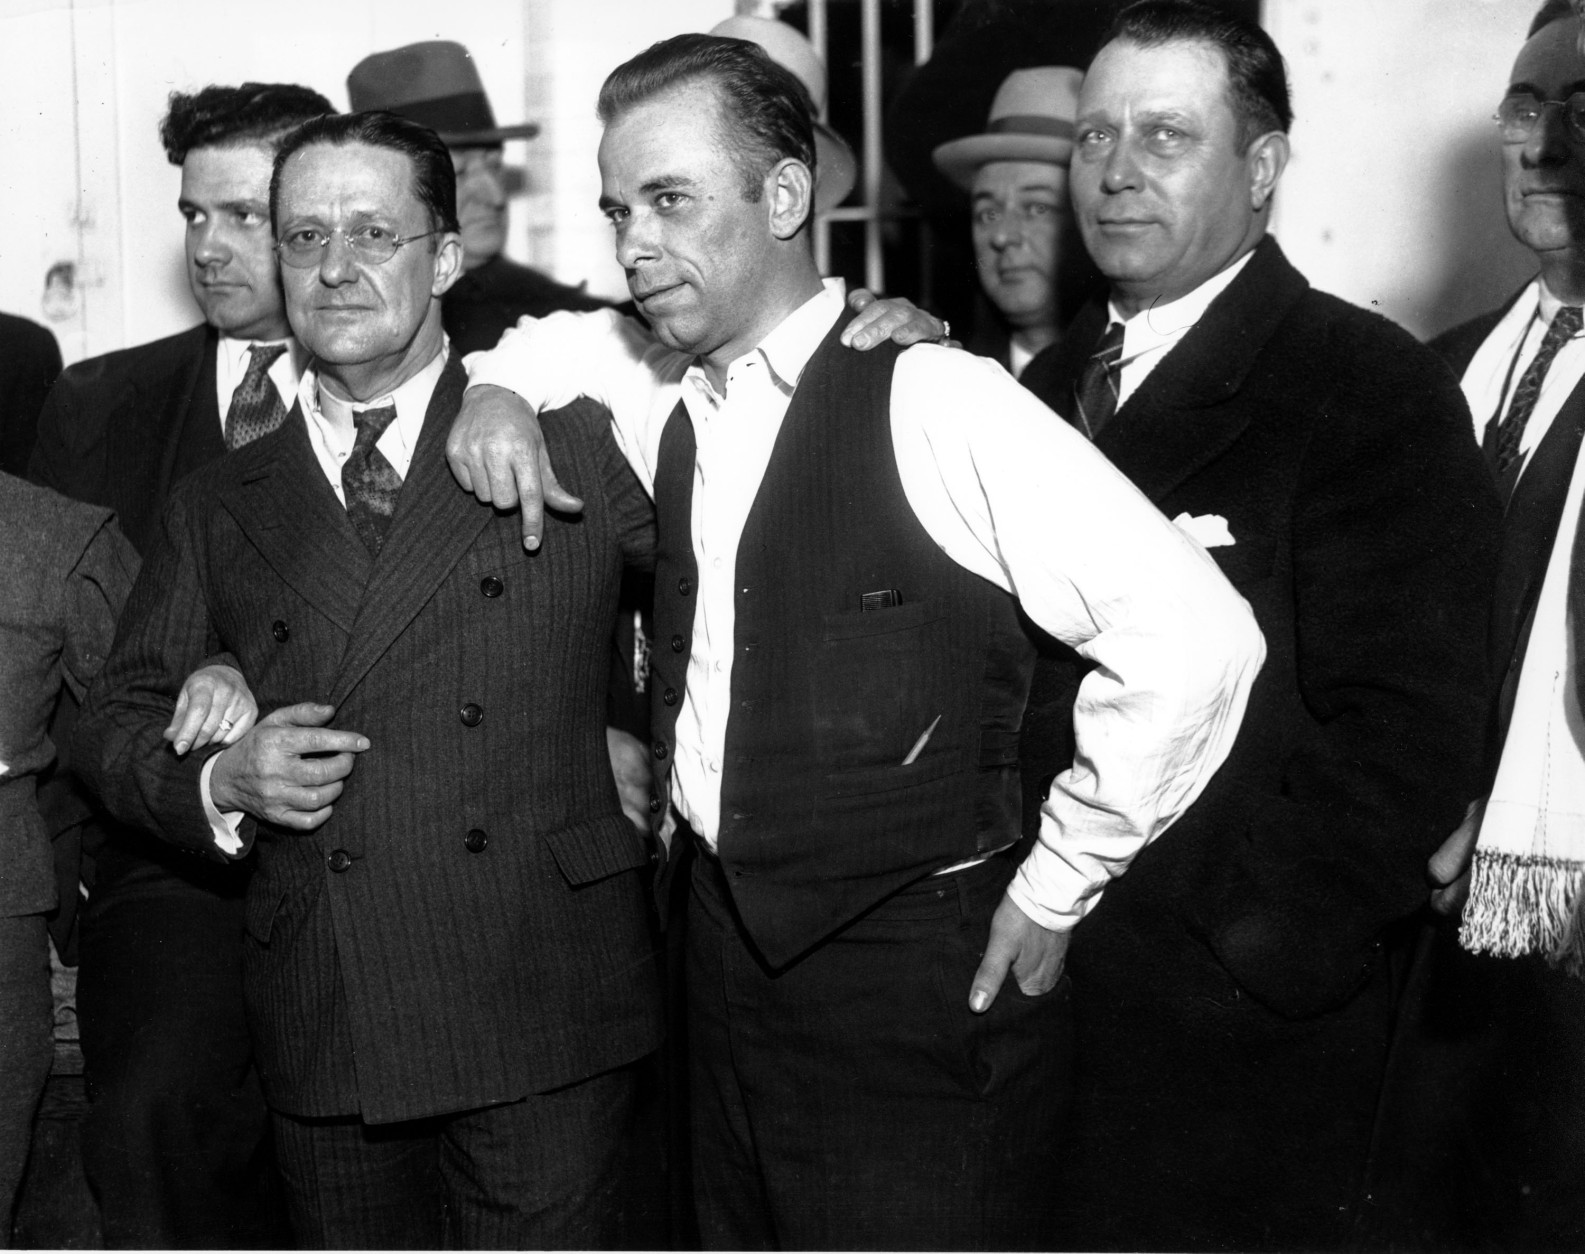 Gangster John Dillinger, center, strikes a pose with Lake County prosecuter Robert Estill, left, in the jail at Crown Point, Indiana, in 1934.  Dillinger is awaiting trial for the murder of police officer Willliam Patrick O'Malley when Dillinger robbed the First National Bank of East Chicago on Jan. 15, 1934.  (AP Photo)